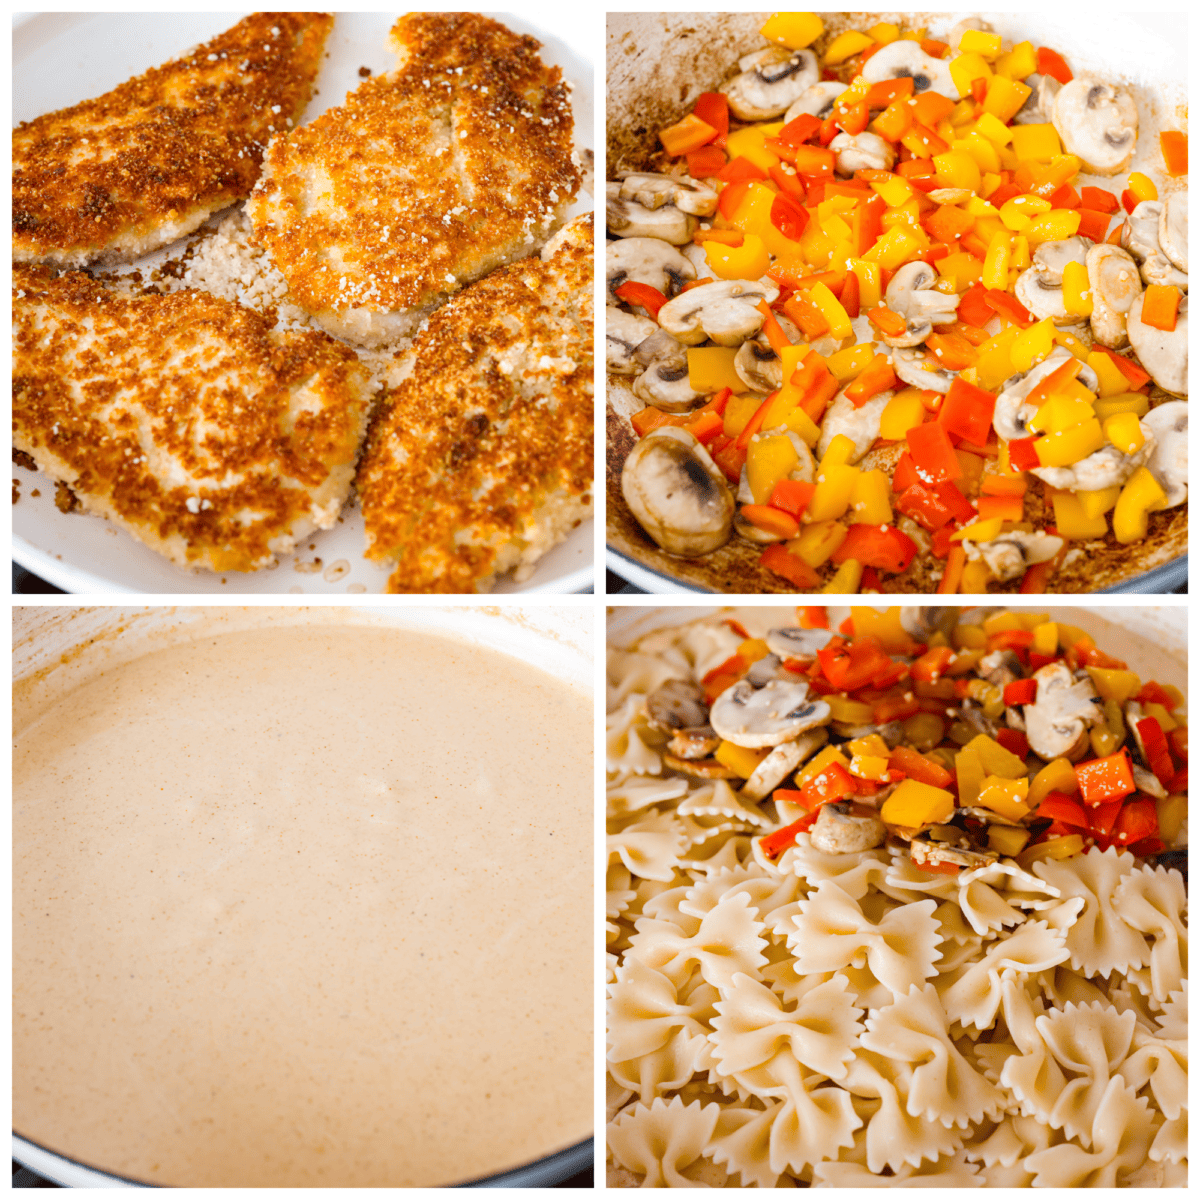 4-photo collage of the chicken, sauteed veggies, sauce, and pasta all being combined.